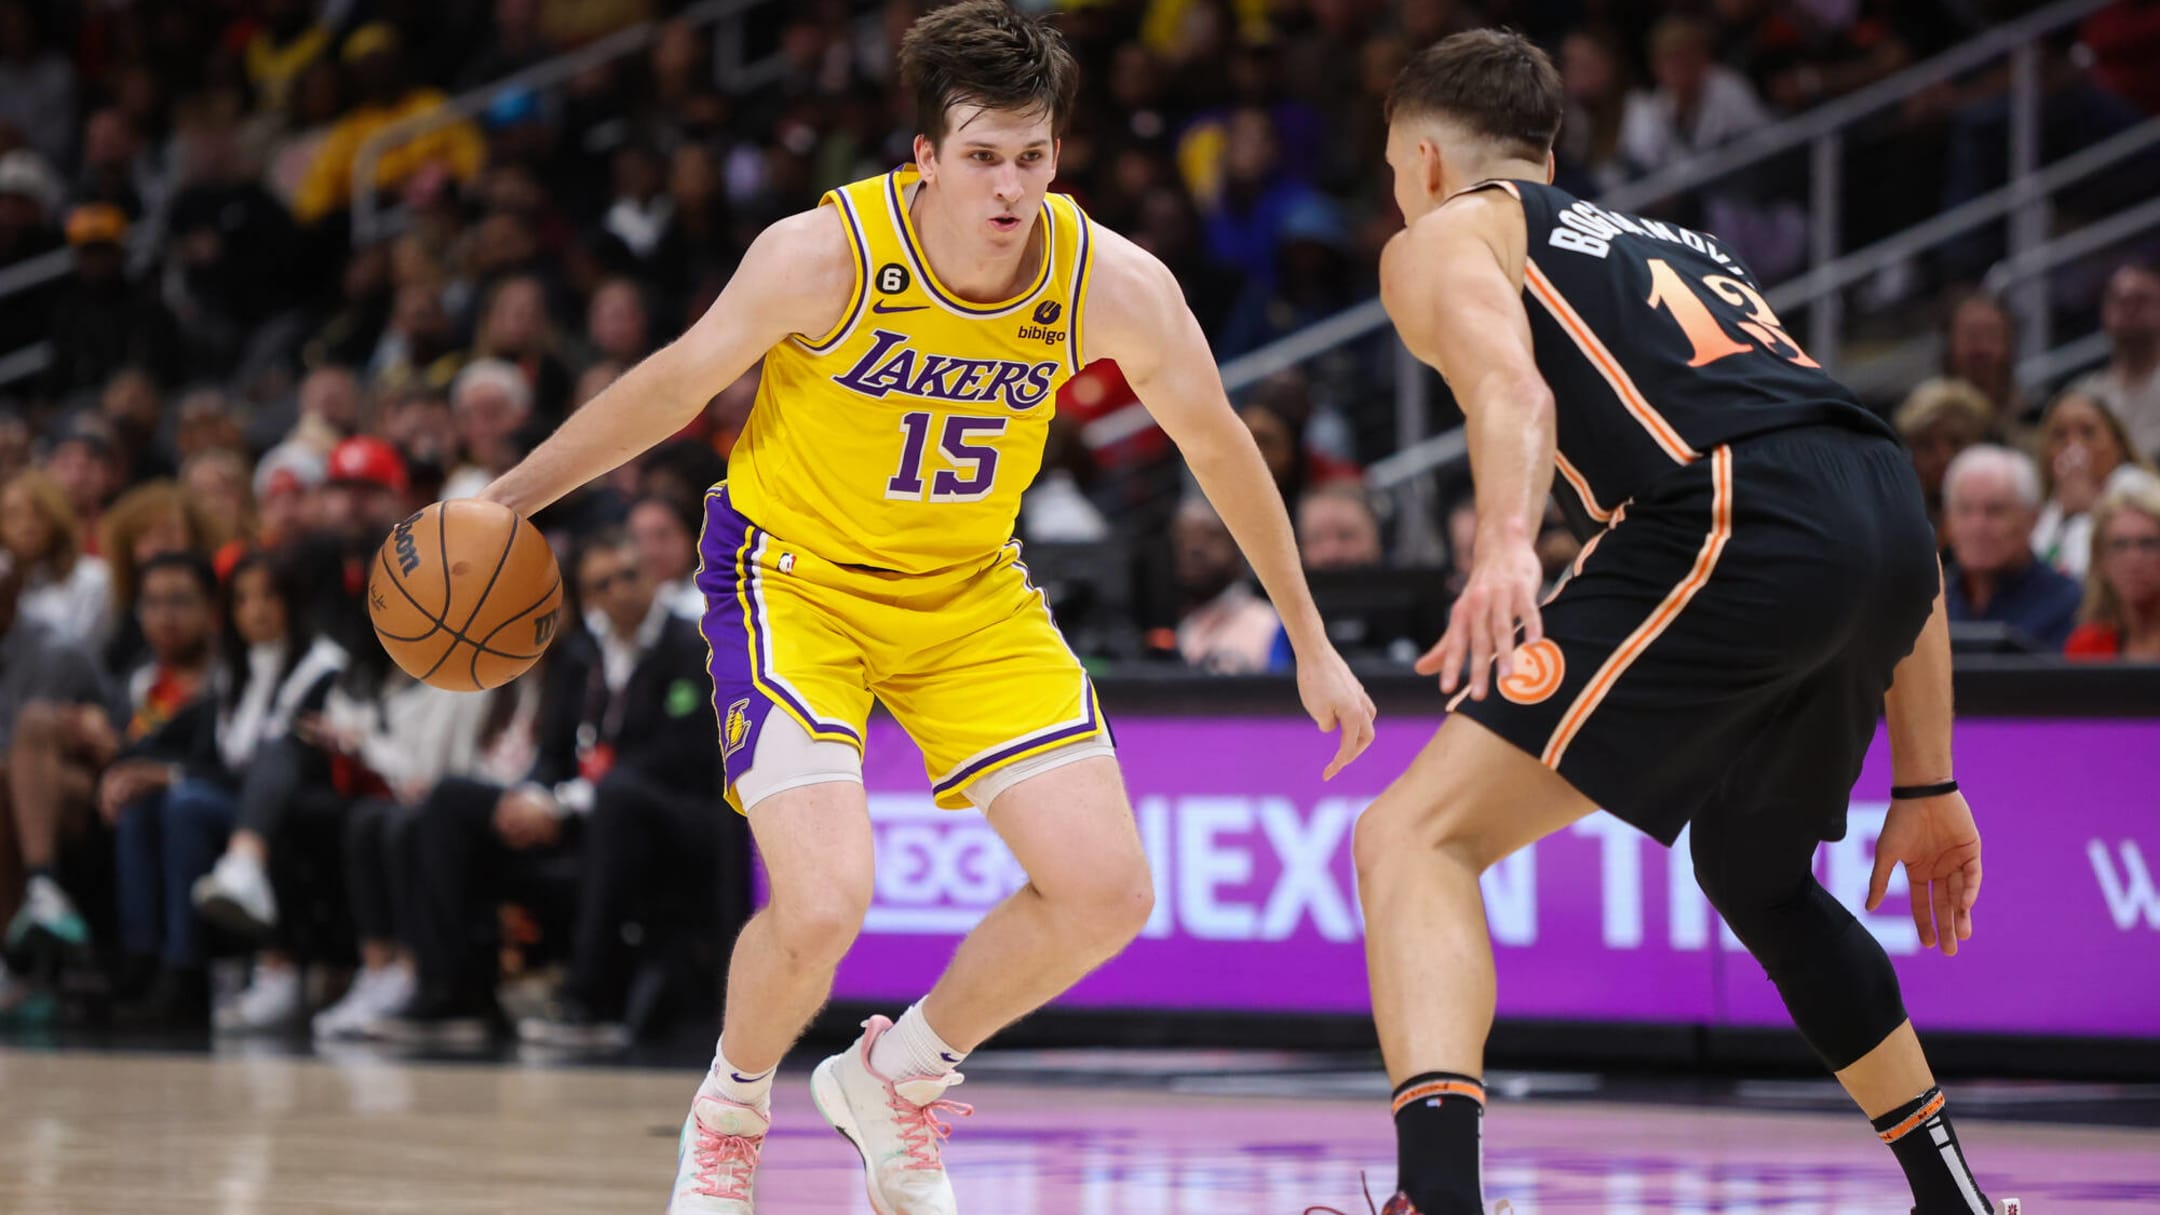 Lakers' Austin Reaves names player he learned most from, and it's